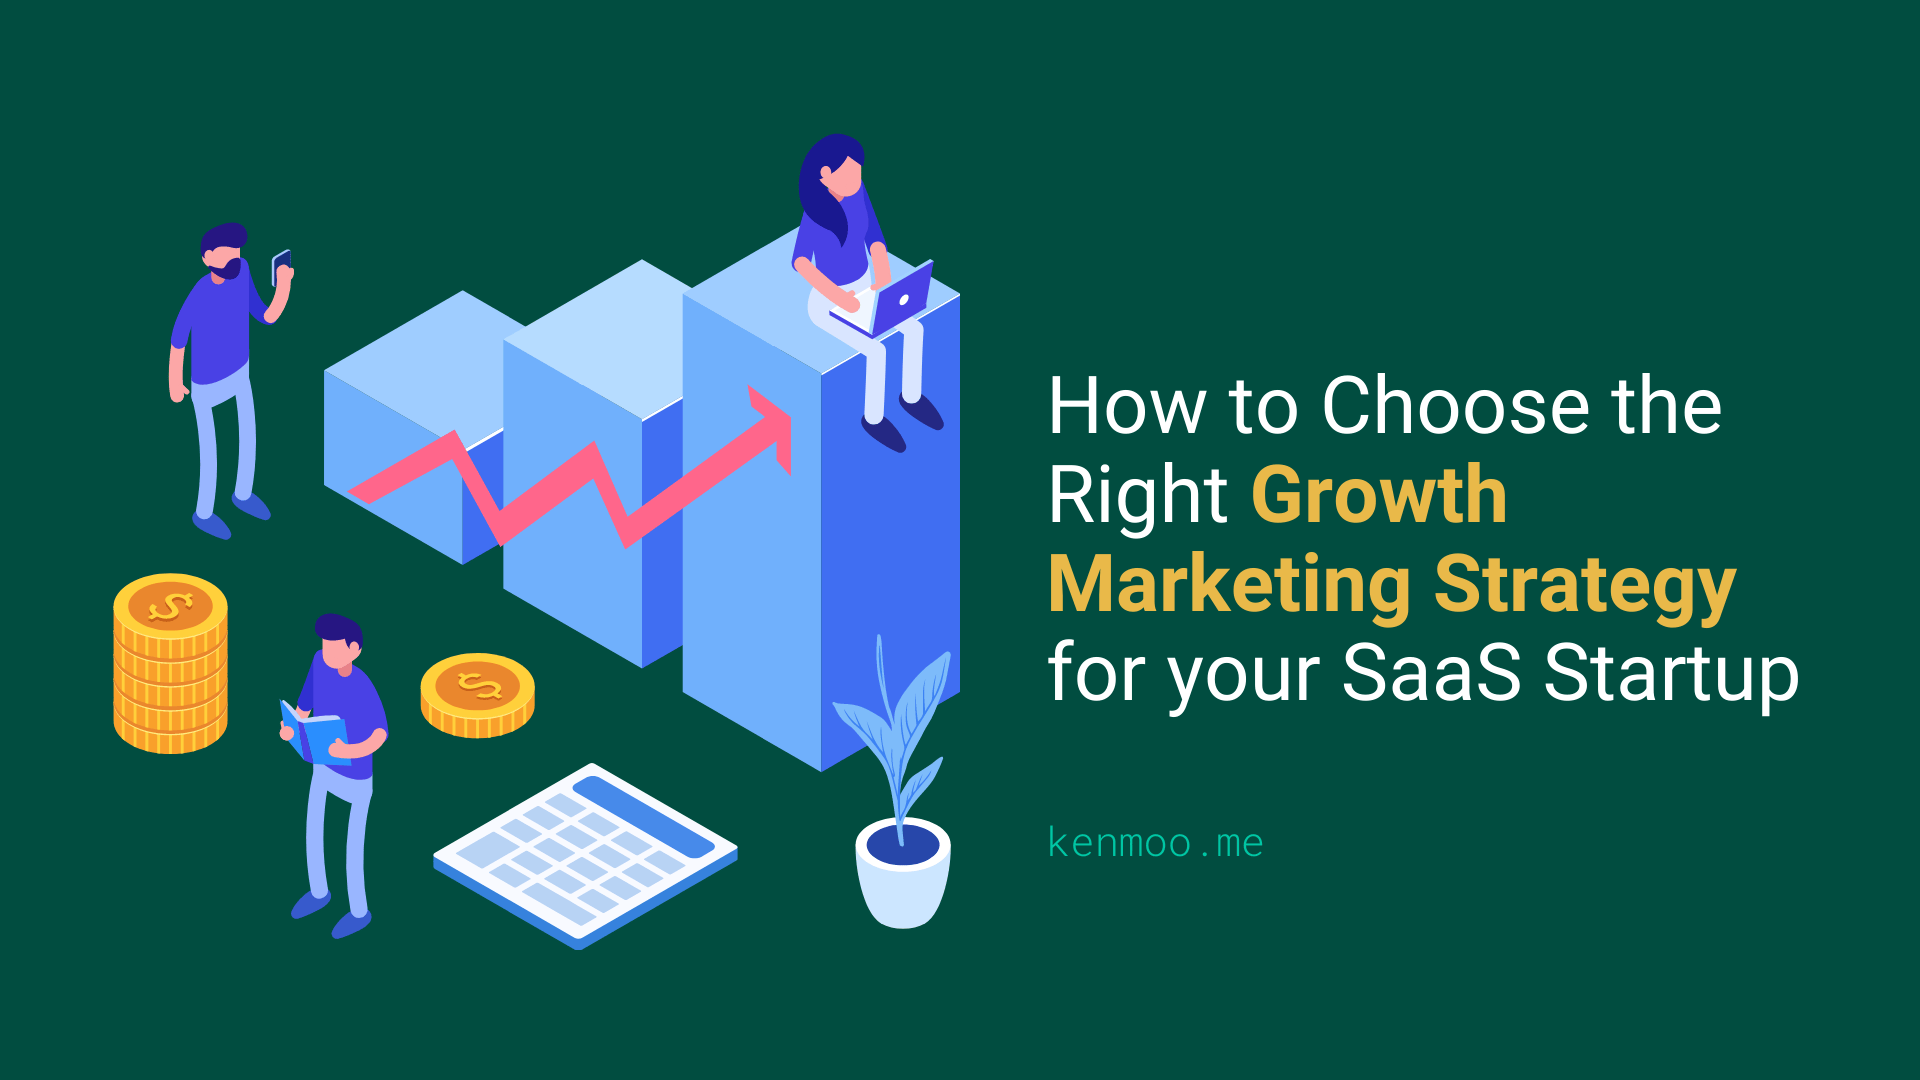 16 Growth Marketing Strategies for your SaaS Startup